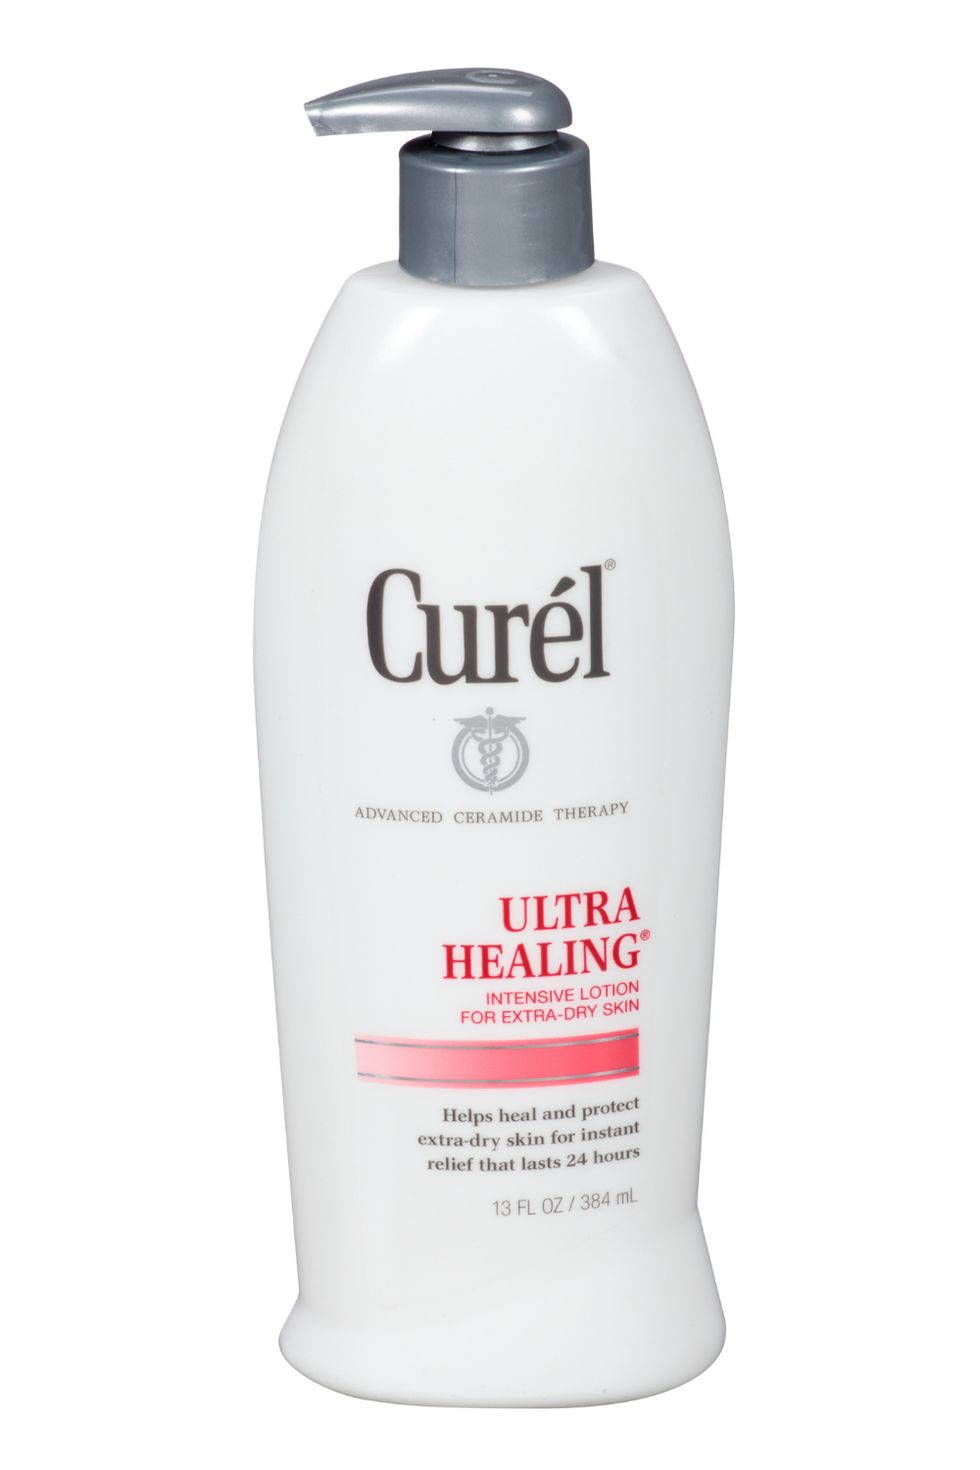 Curél Ultra Healing Intensive Lotion for Extra-Dry Skin